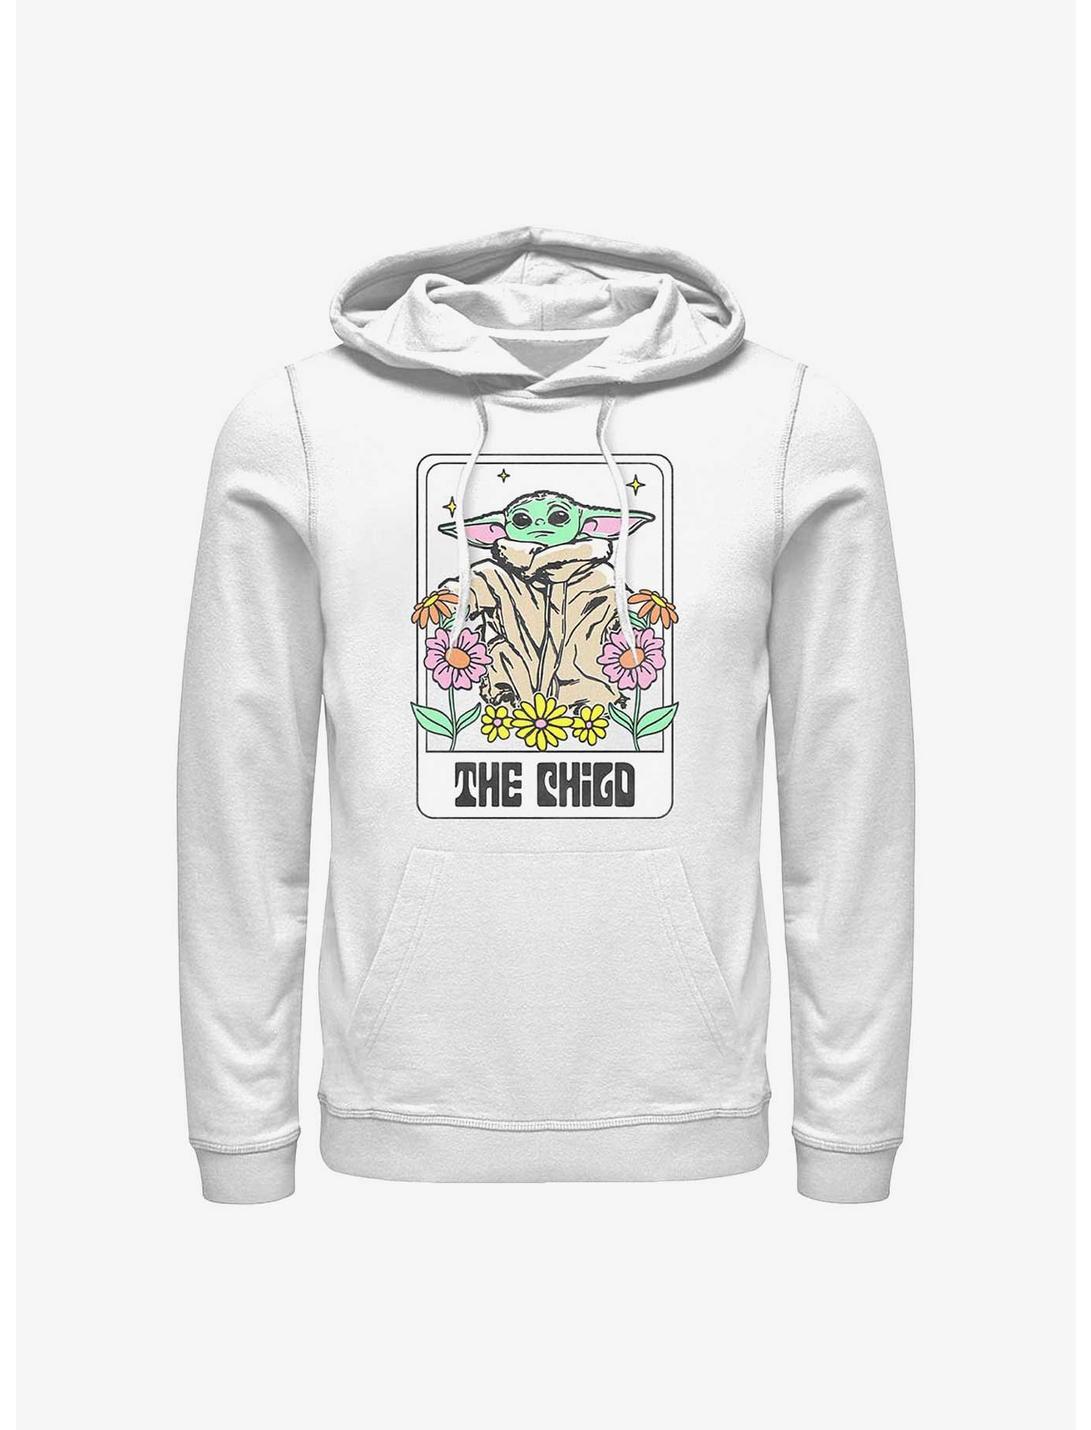 Star Wars The Mandalorian The Child Floral Hoodie, WHITE, hi-res